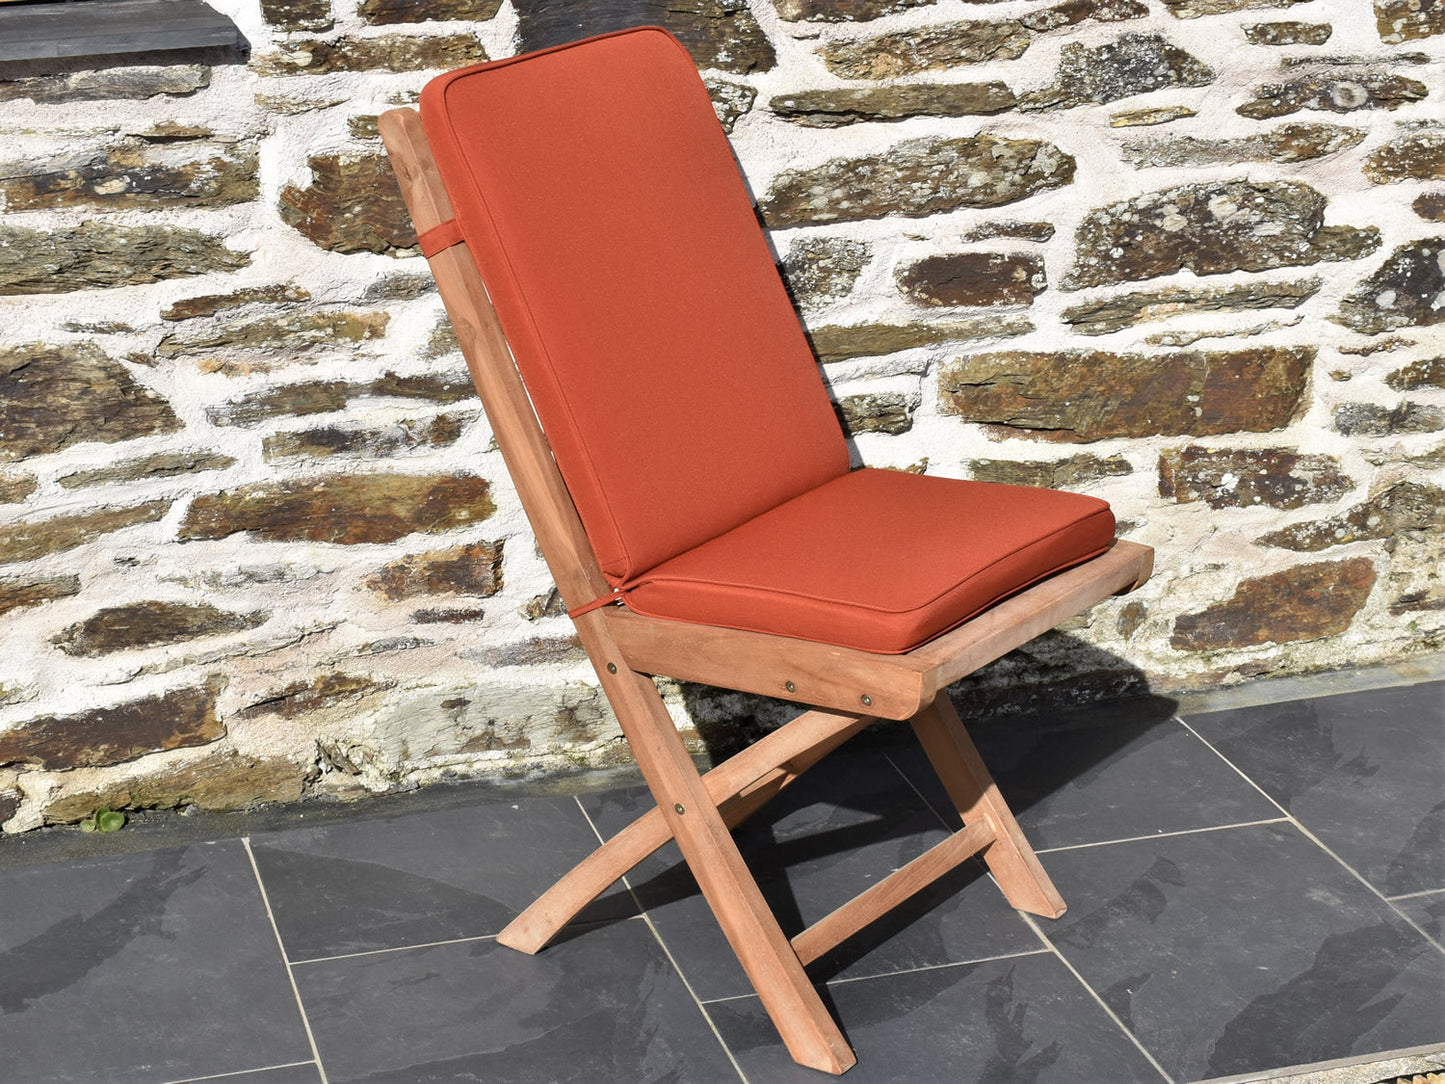 Classic terracotta orange colour outdoor folding seat pad and back cushion, perfect for teak folding garden chairs